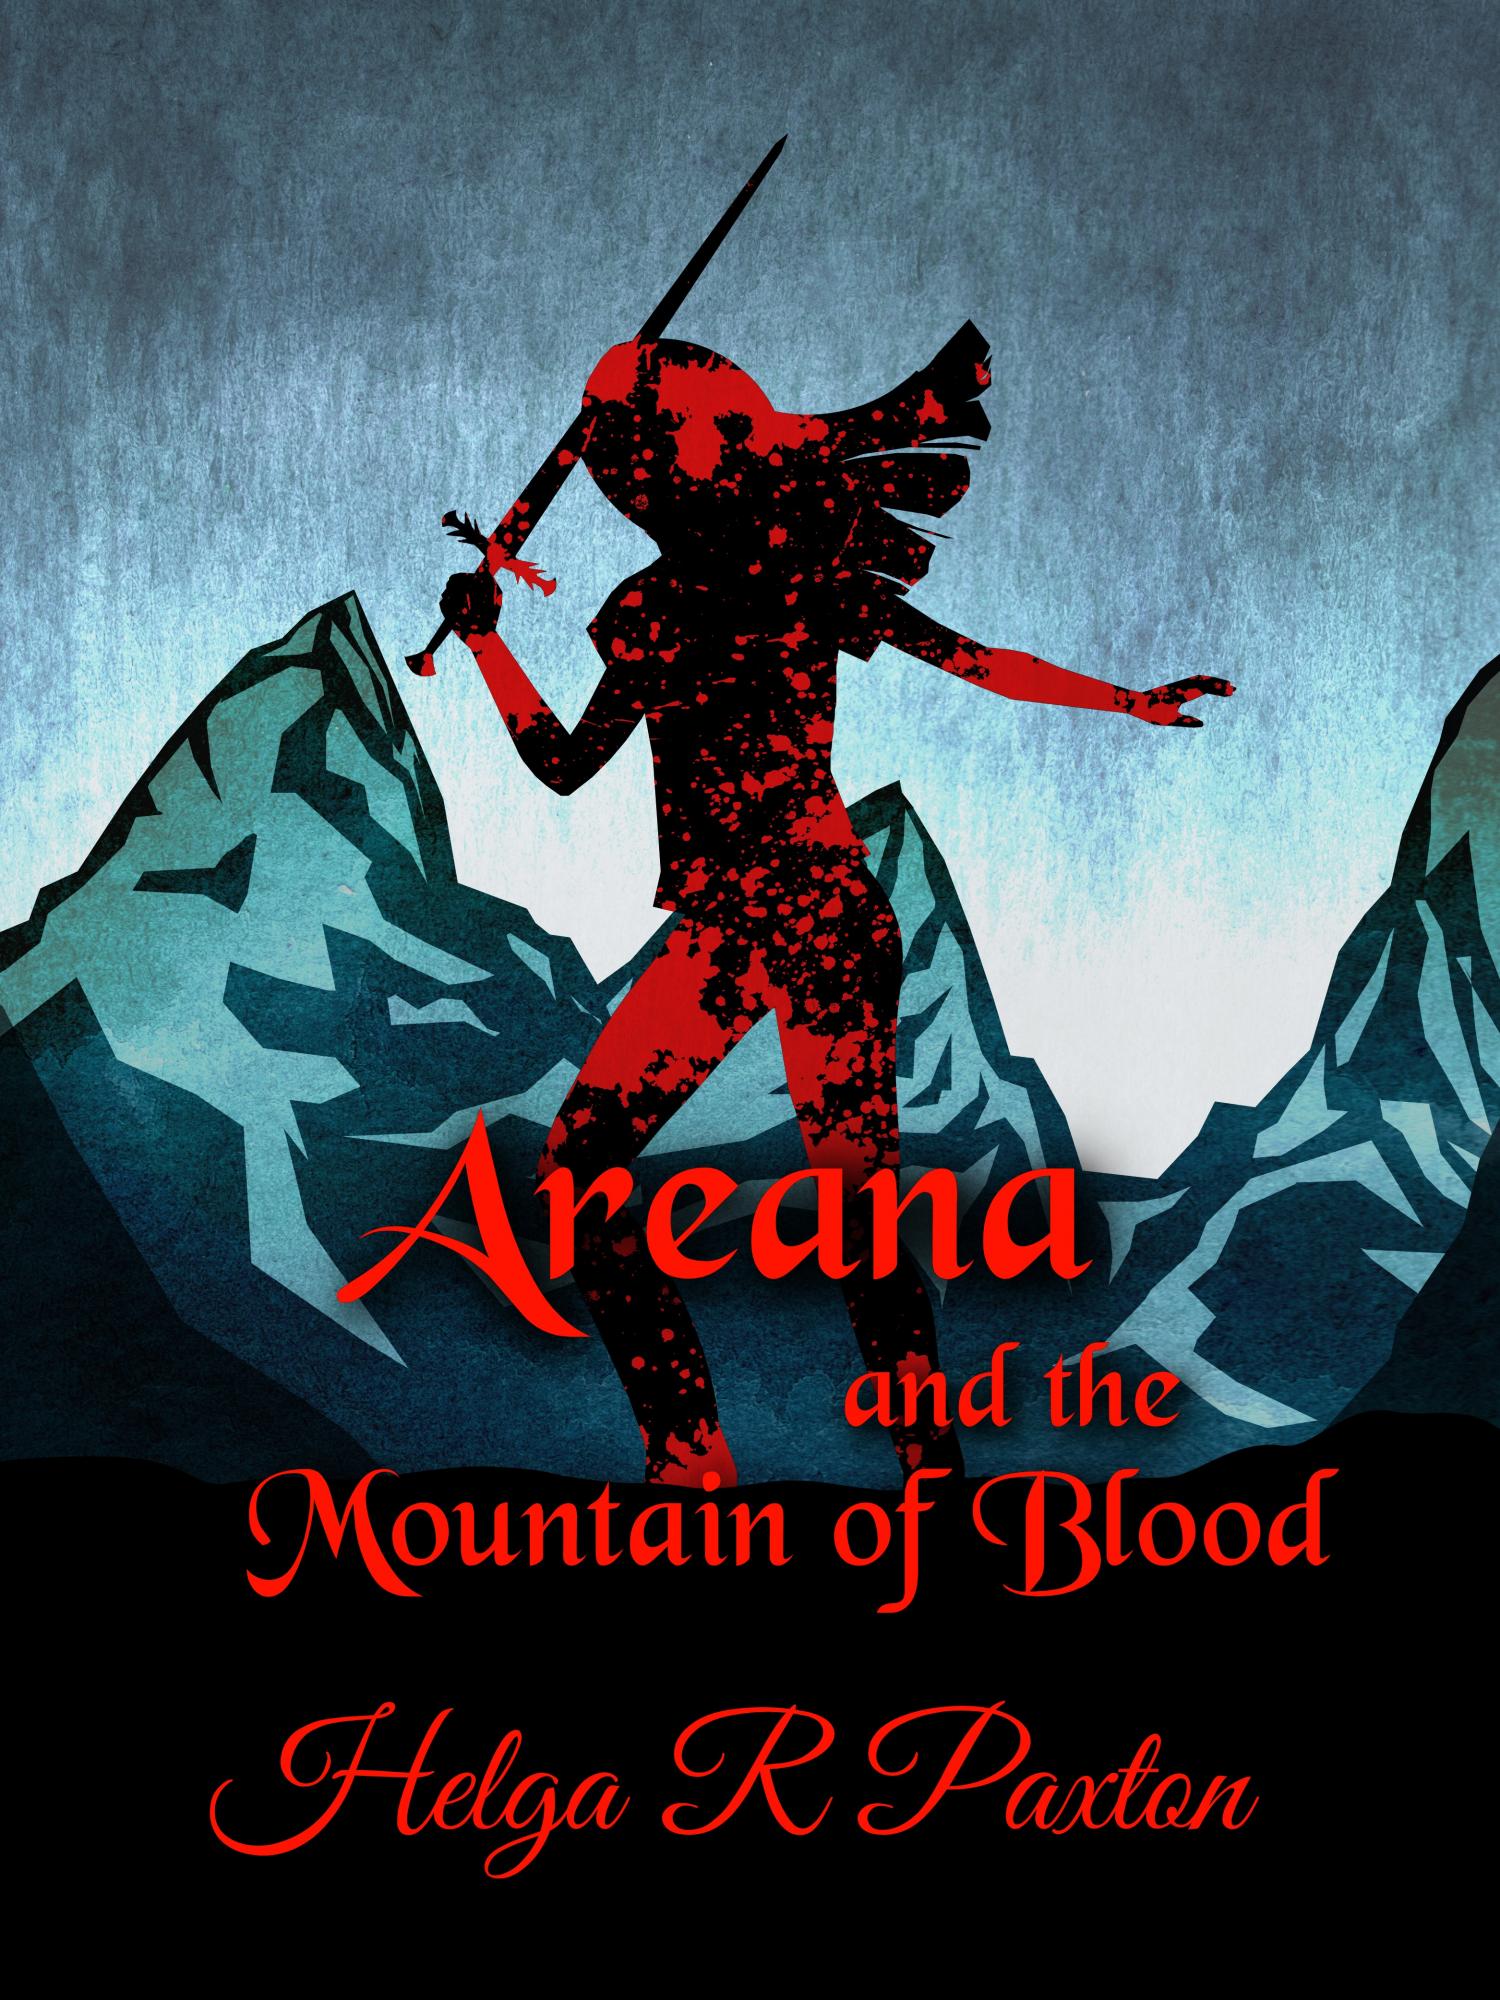 Areana and the Mountain of Blood cover by Helga R Paxton, 29-April-2021